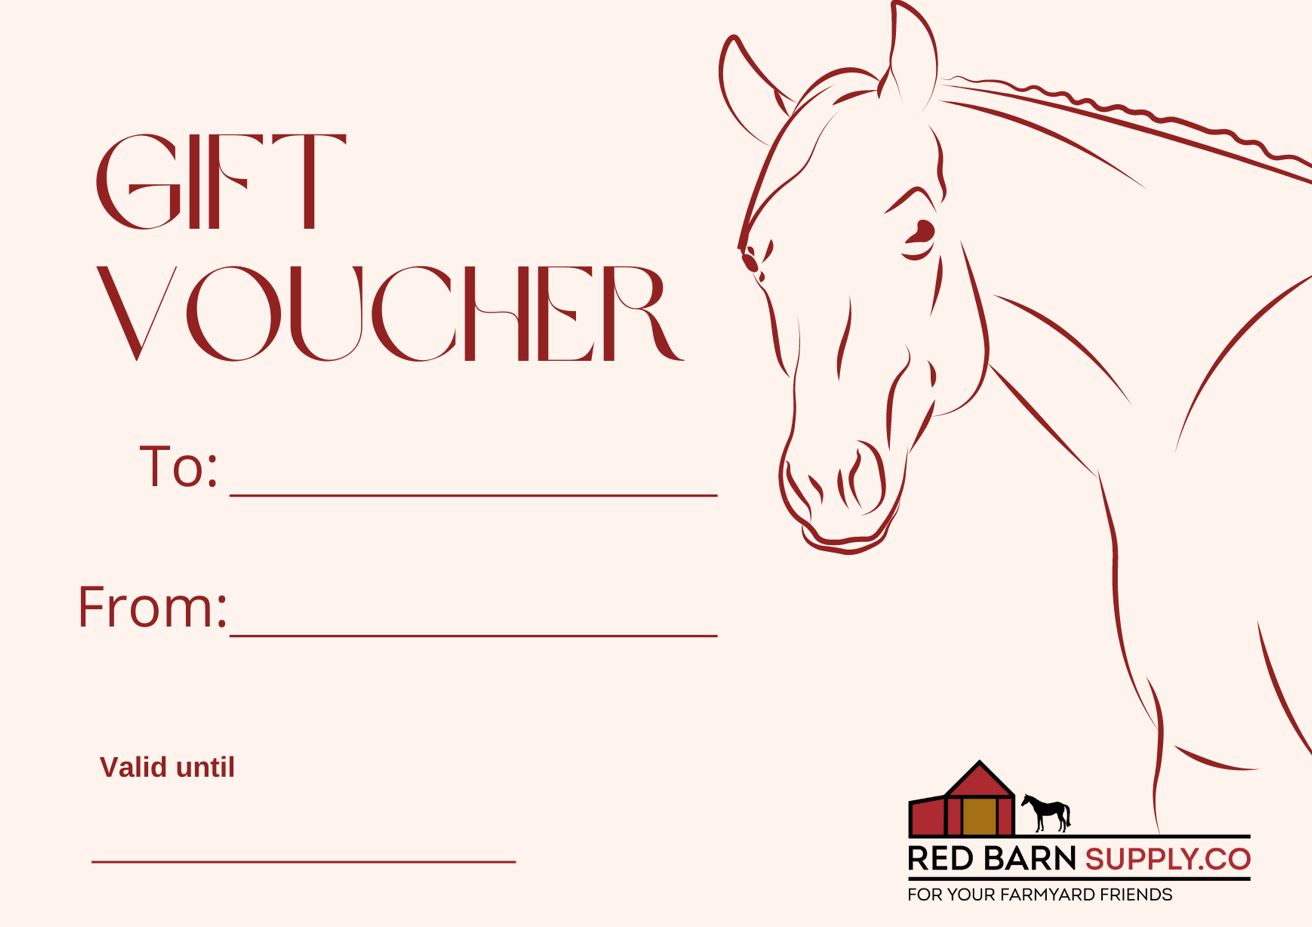 Red Barn Supply Co Gift Voucher - Red Barn Supply Company 